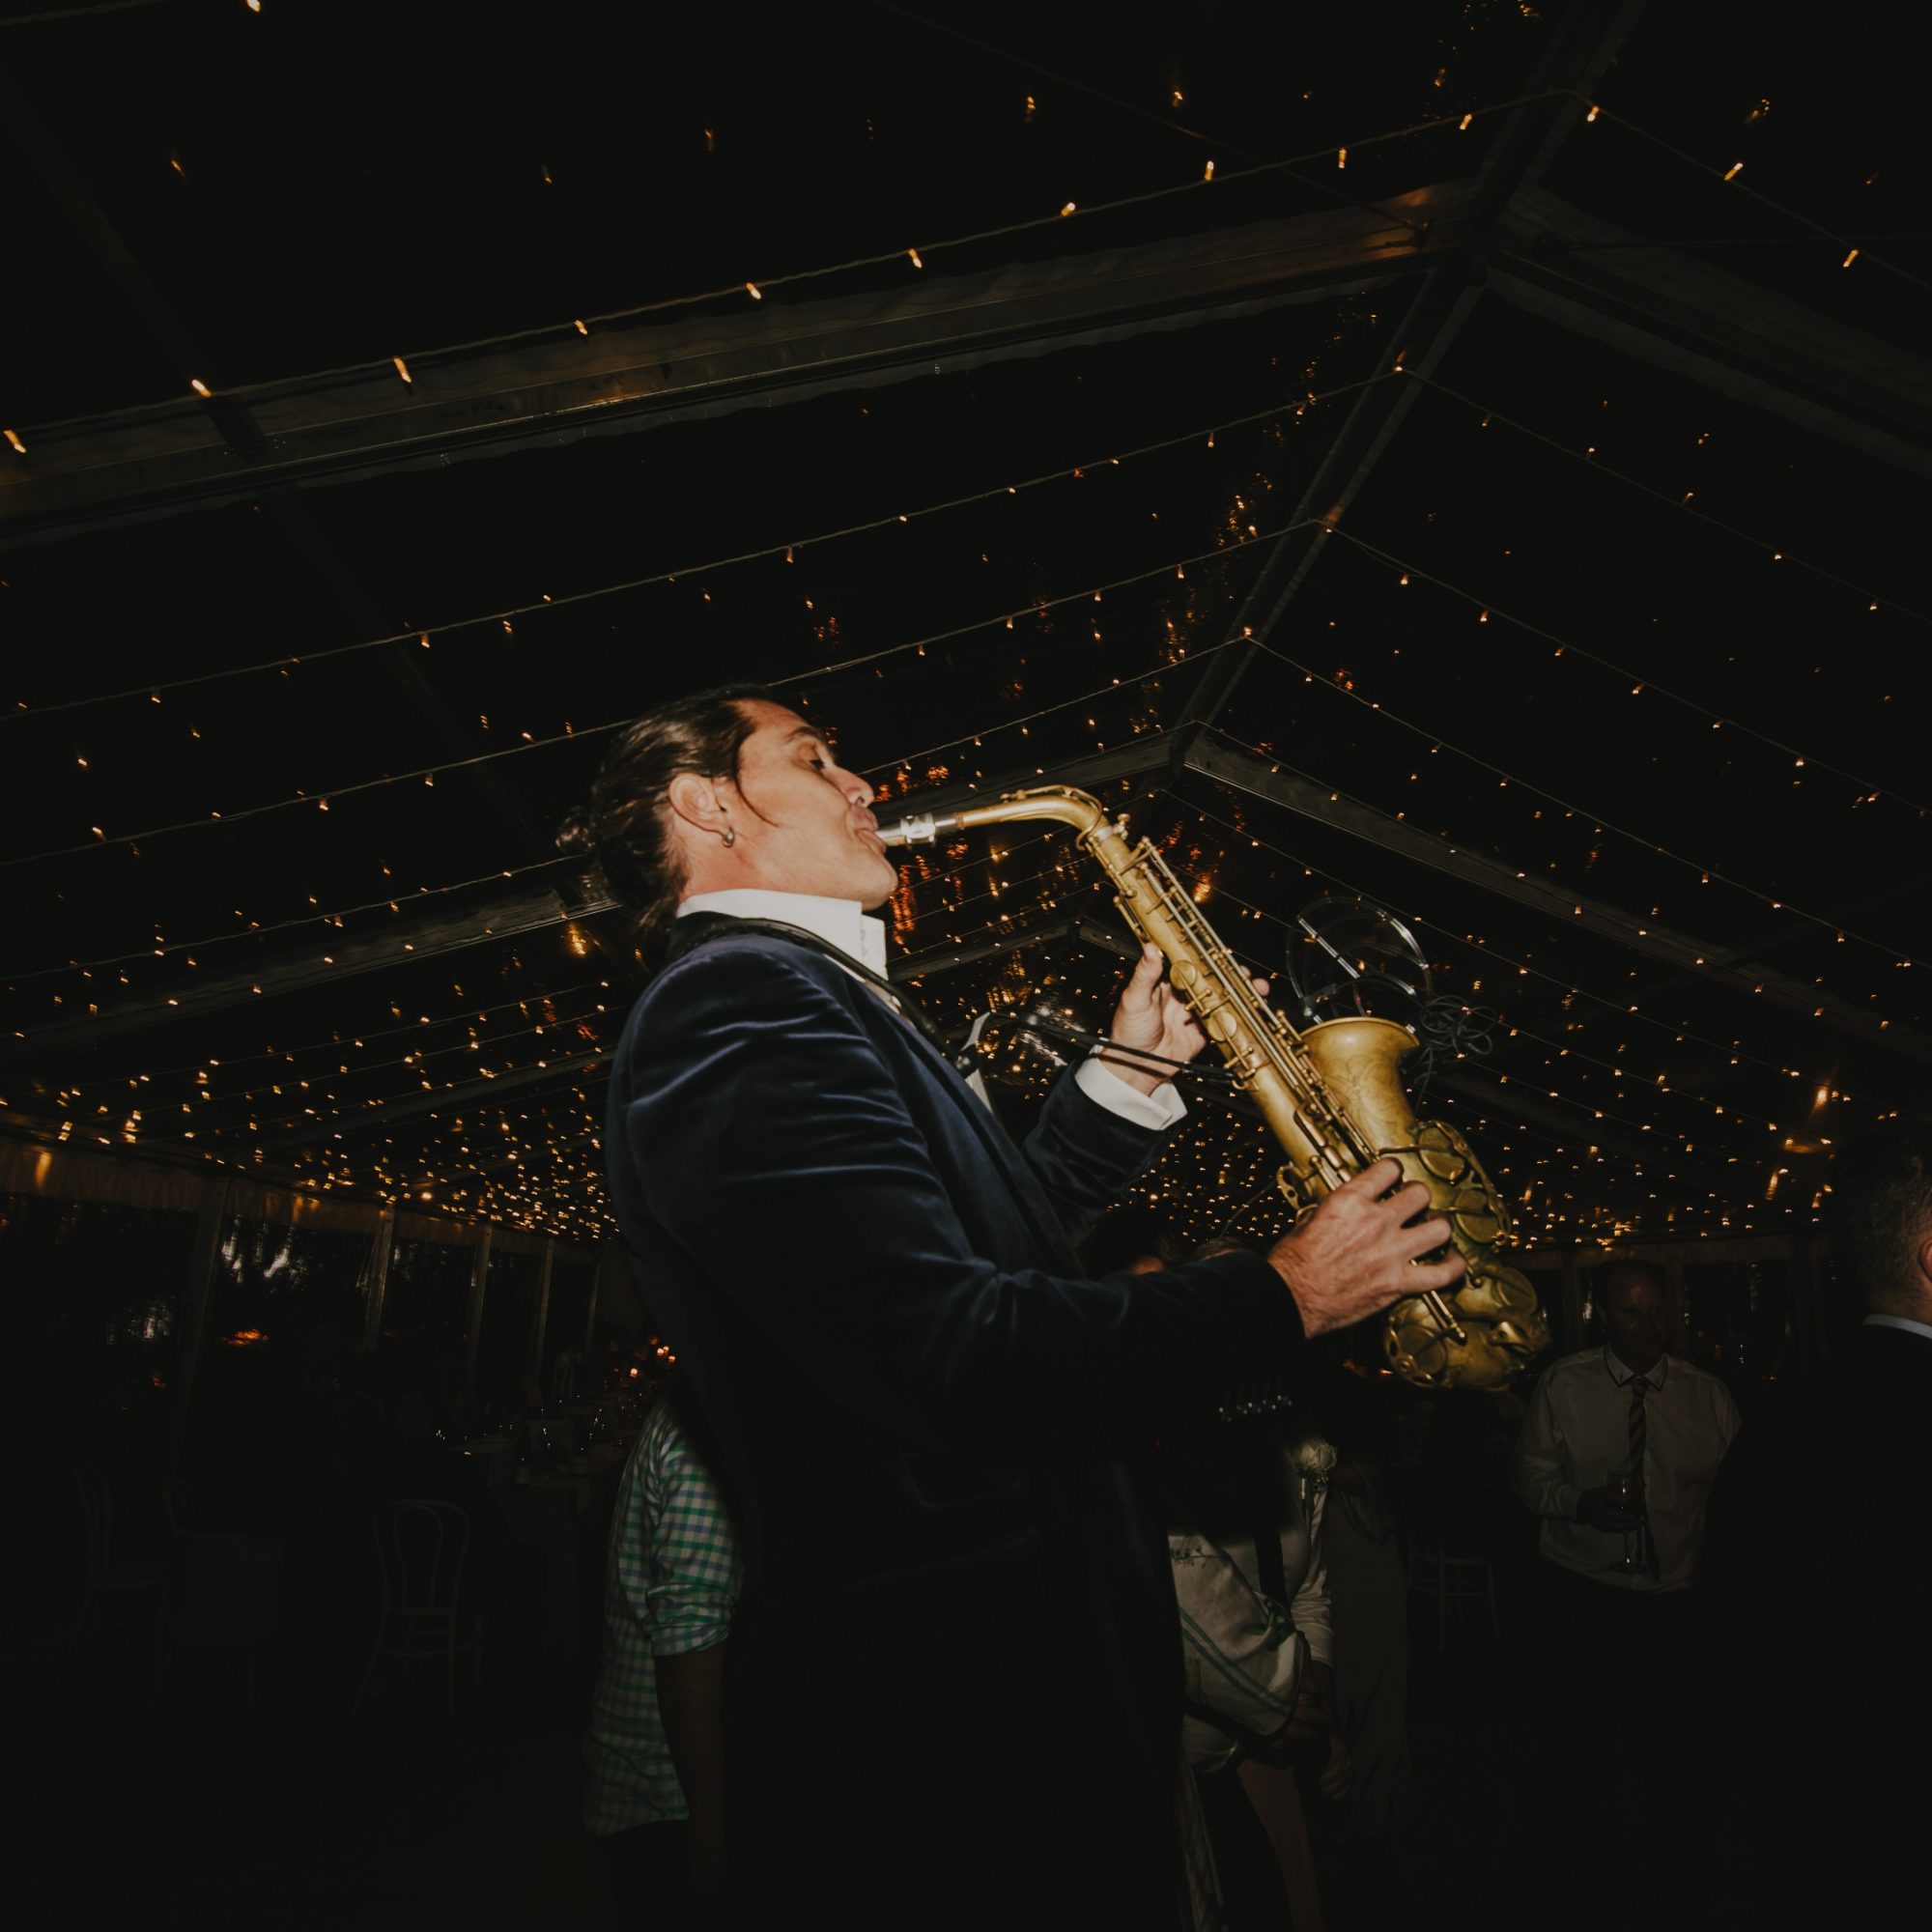 Top DJ and Saxophone Songs for an Unforgettable Wedding Dance Floor